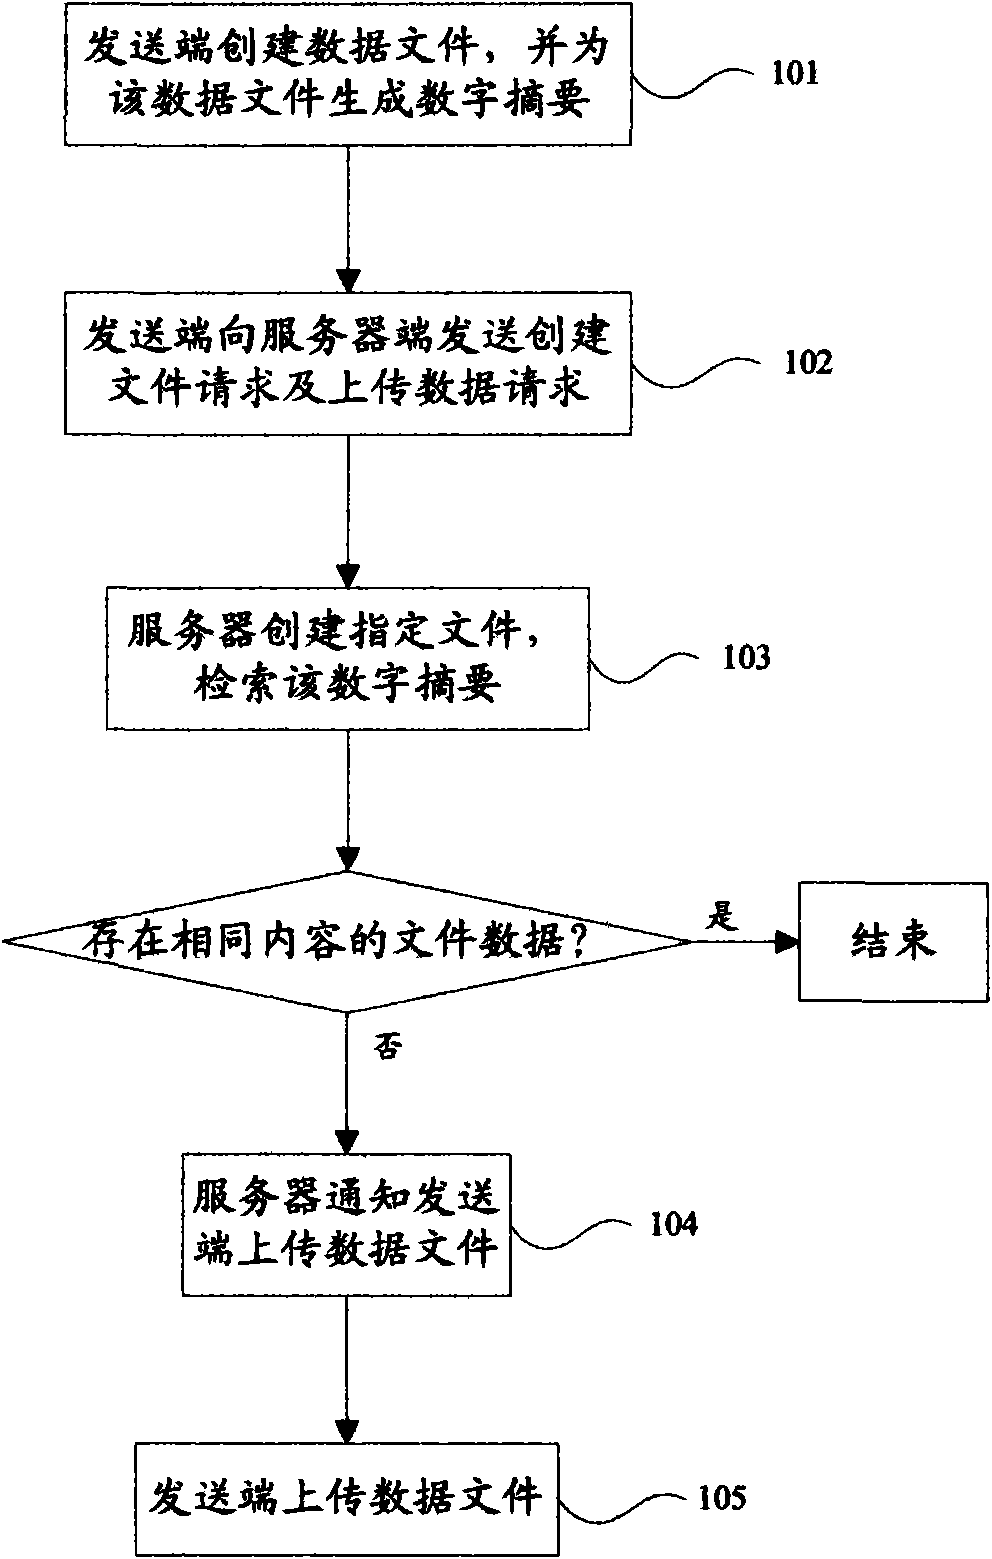 Method and system of data transmission